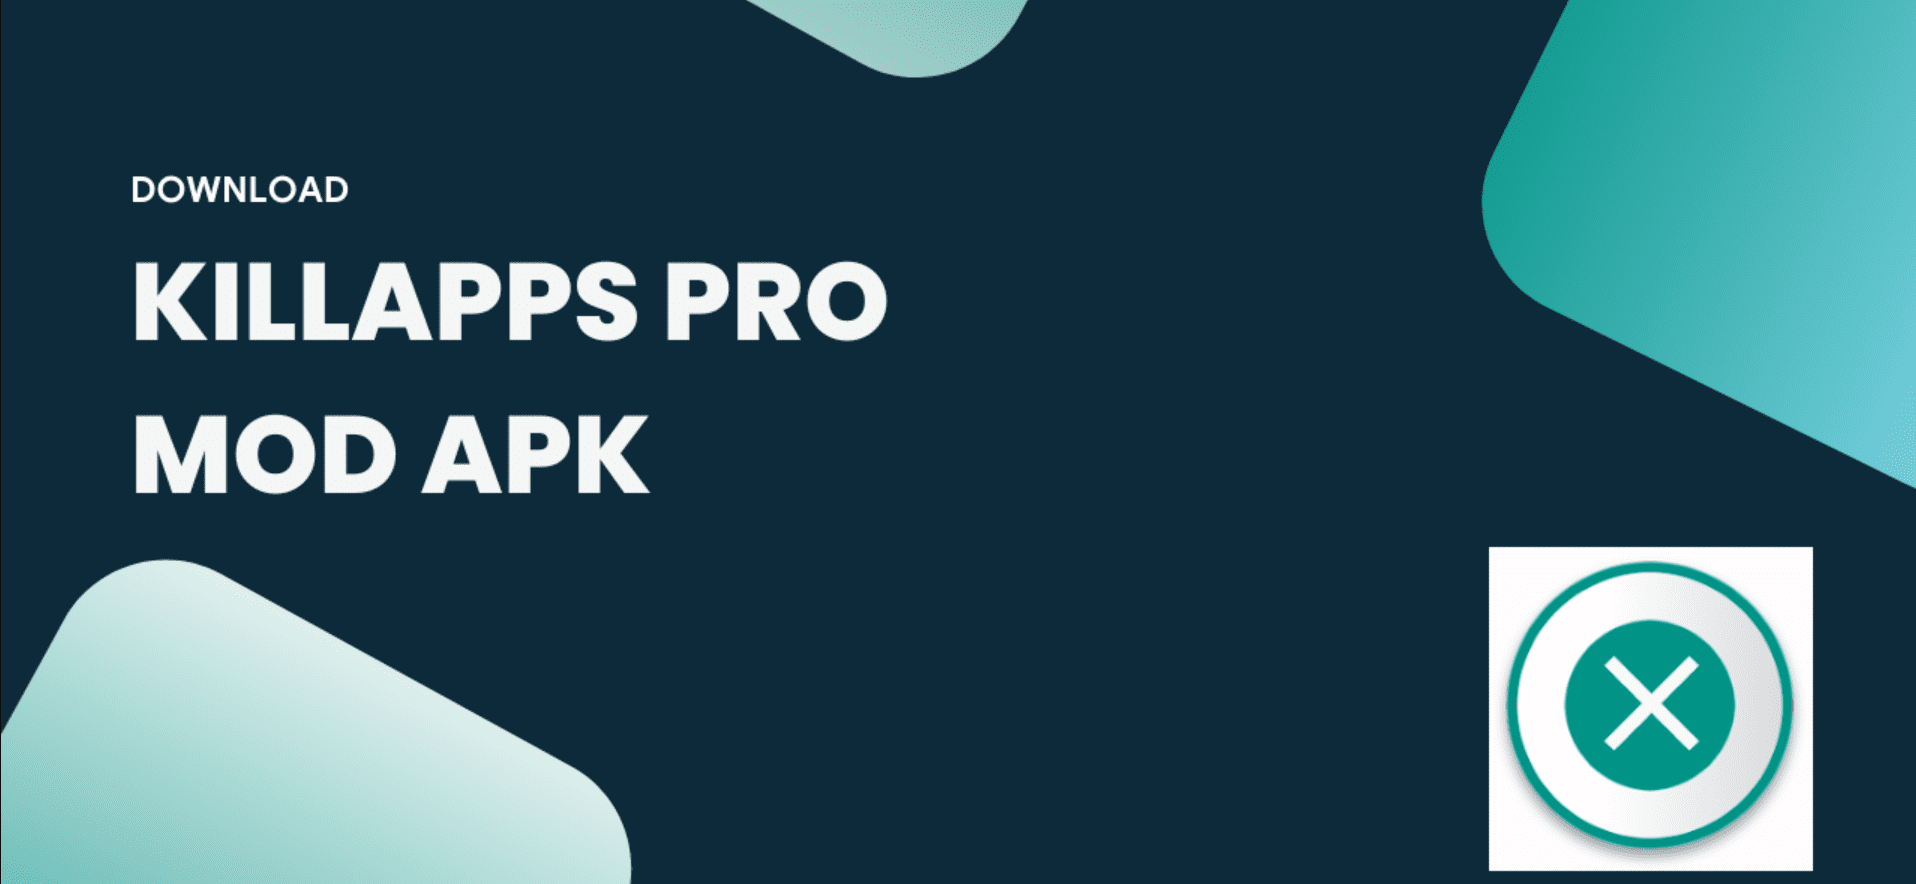 KillApps Pro Mod APK - Download now! Close all apps with this powerful modded version.